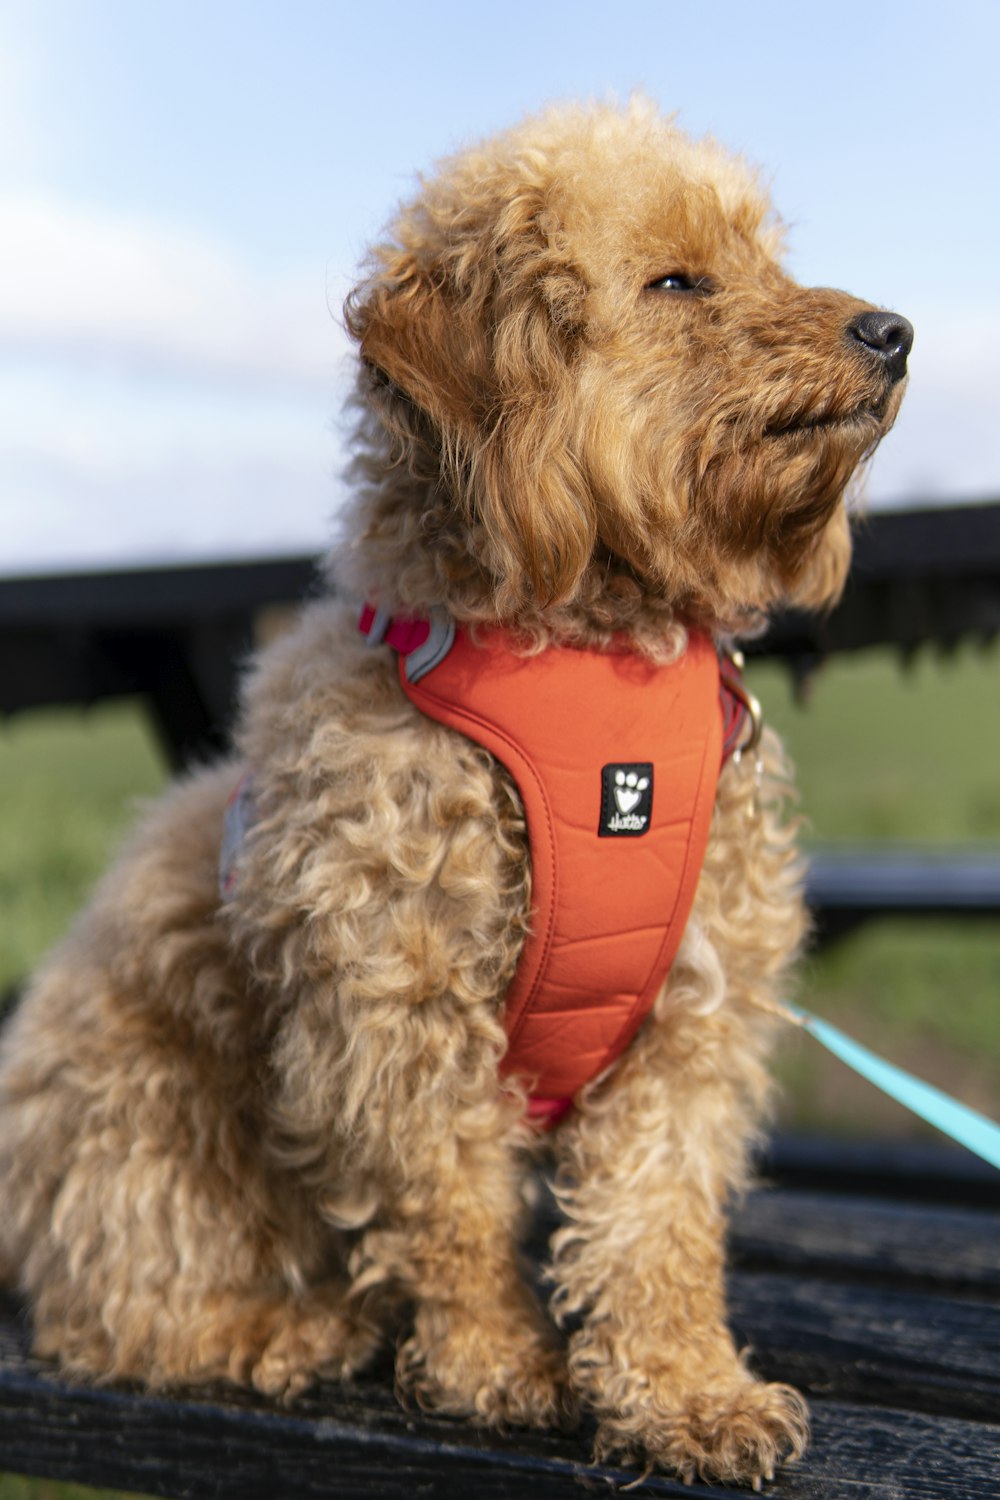 a brown dog wearing an orange vest sitting on a bench